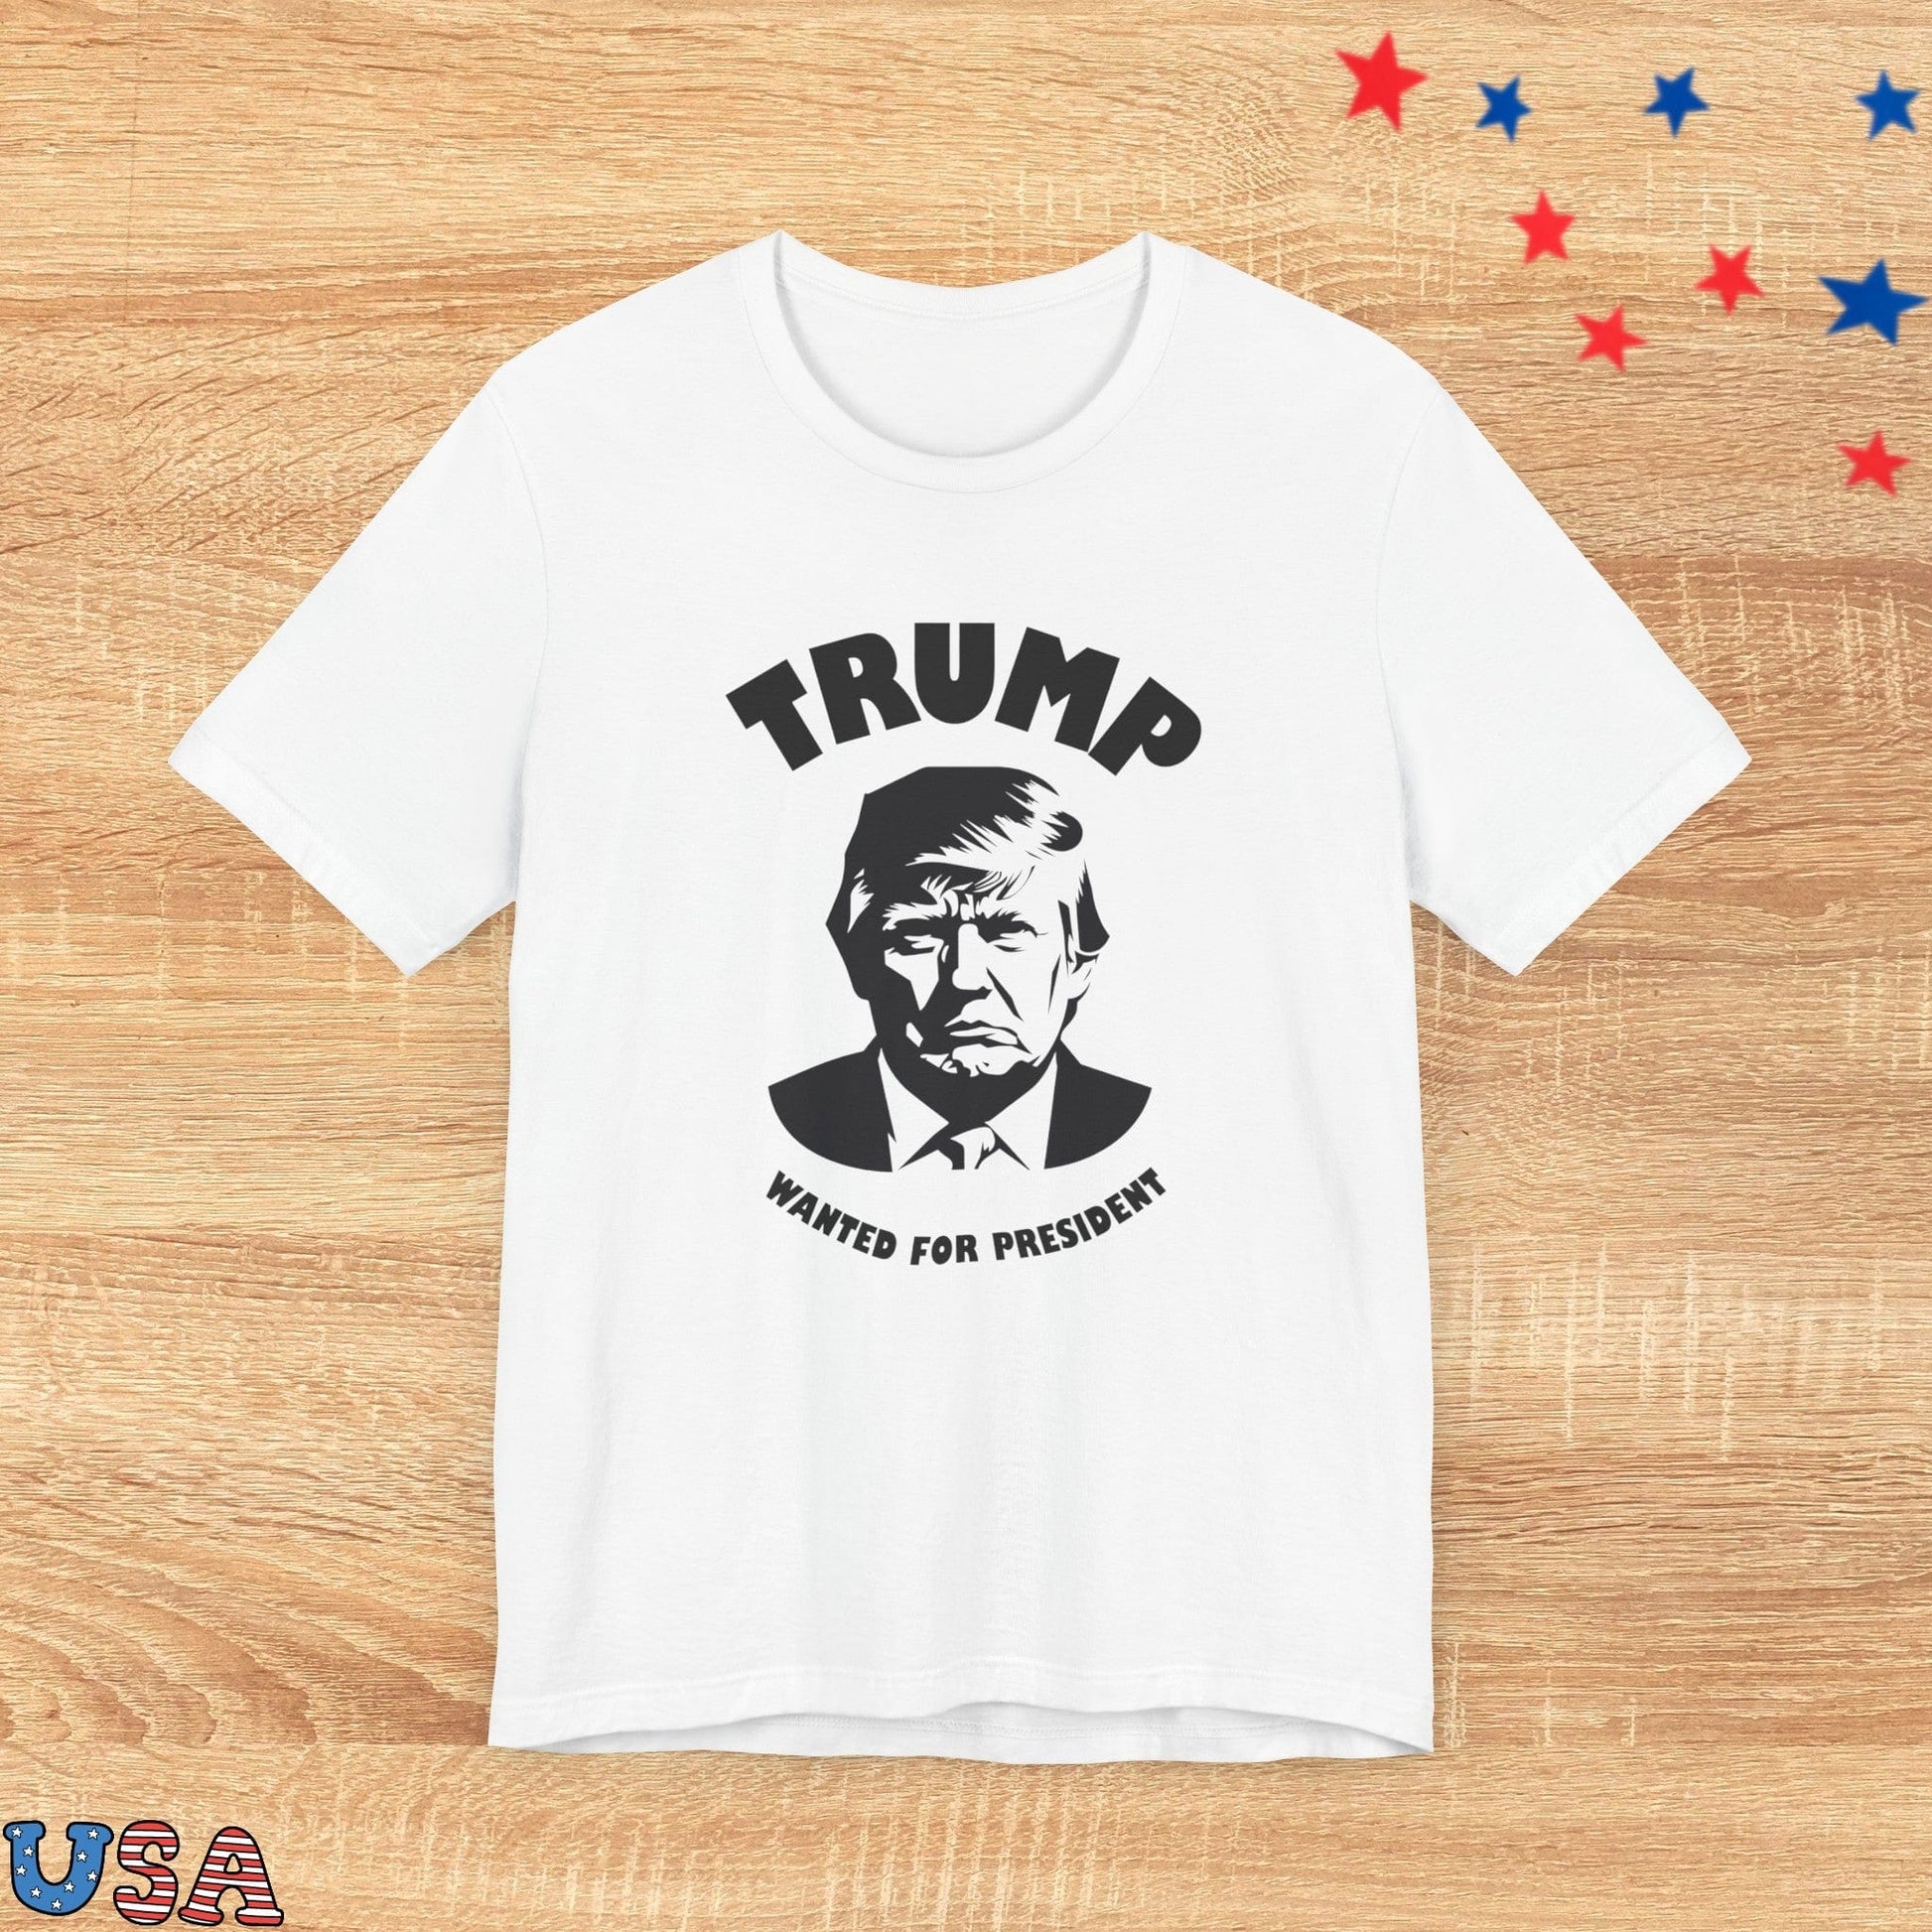 patriotic stars T-Shirt White / S Trump Wanted For President